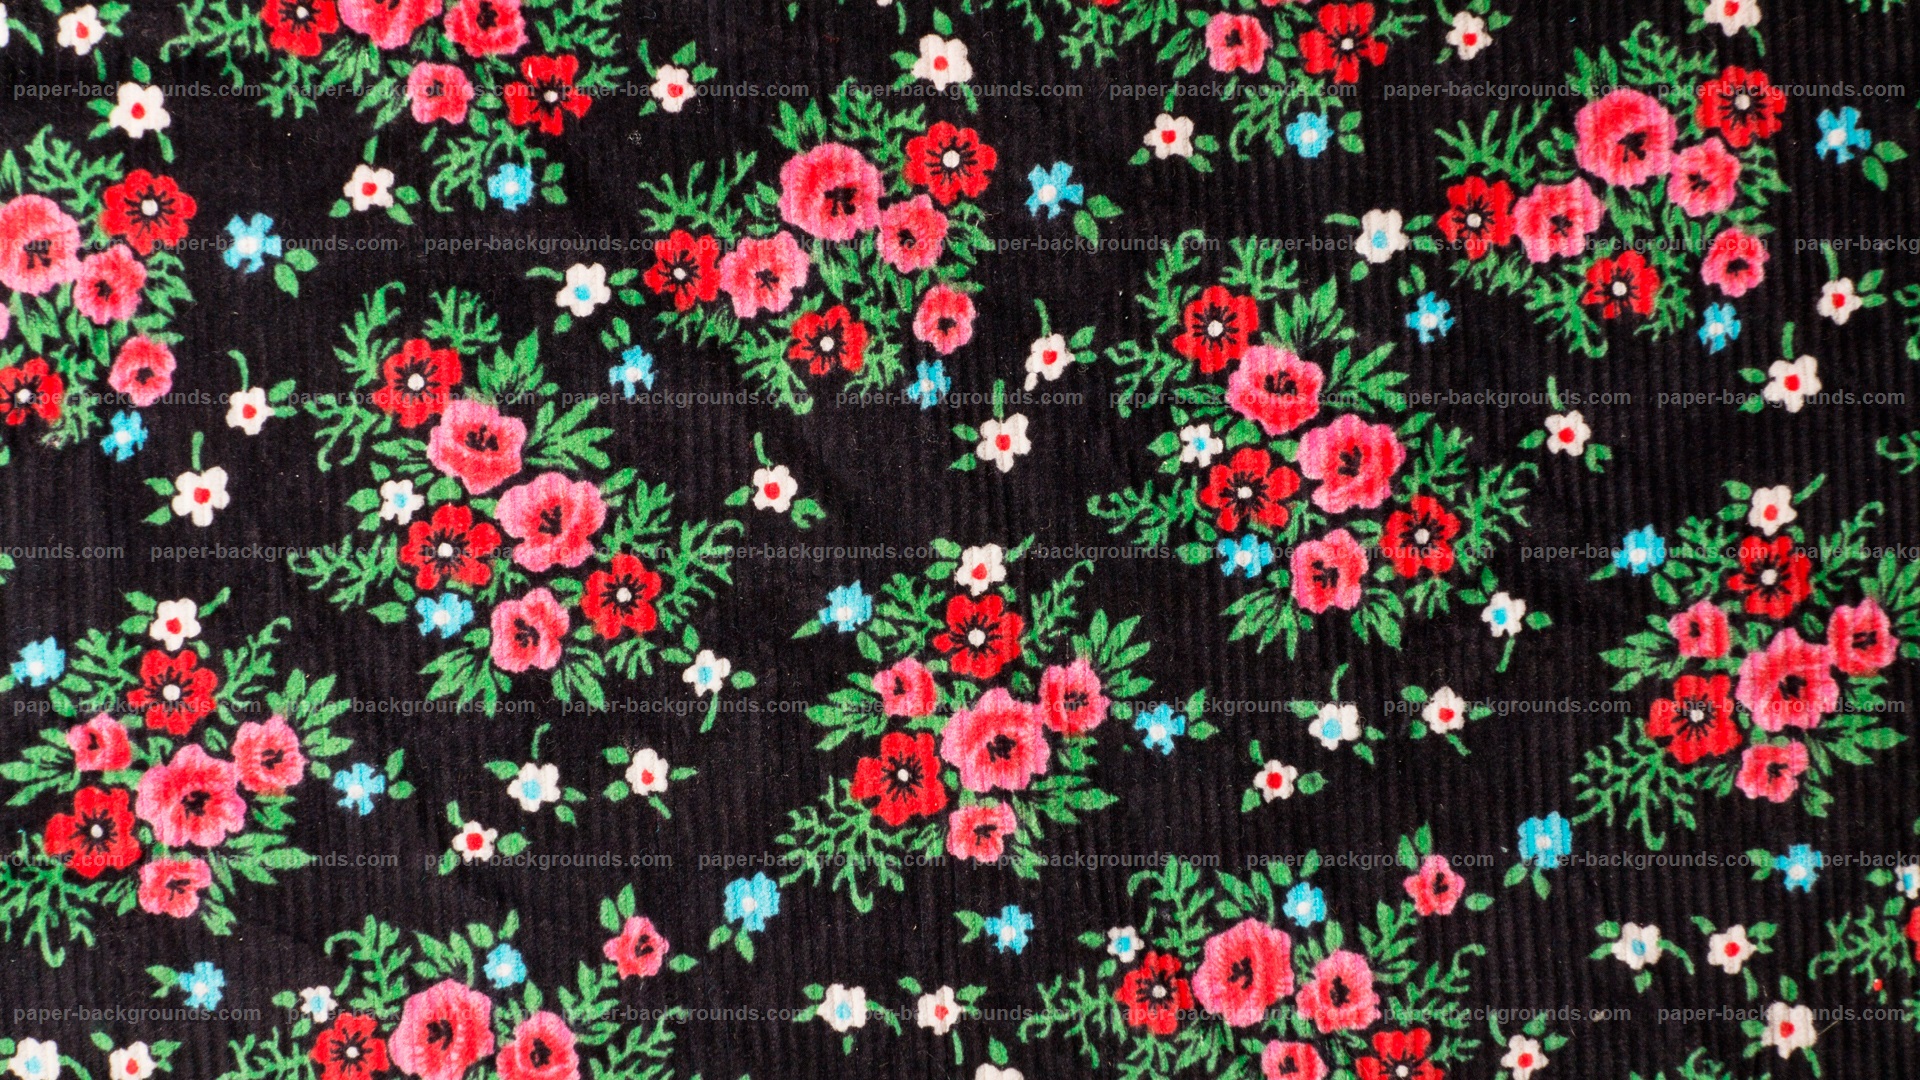 Red Flowers On Black Fabric Hd - Garden Roses - HD Wallpaper 